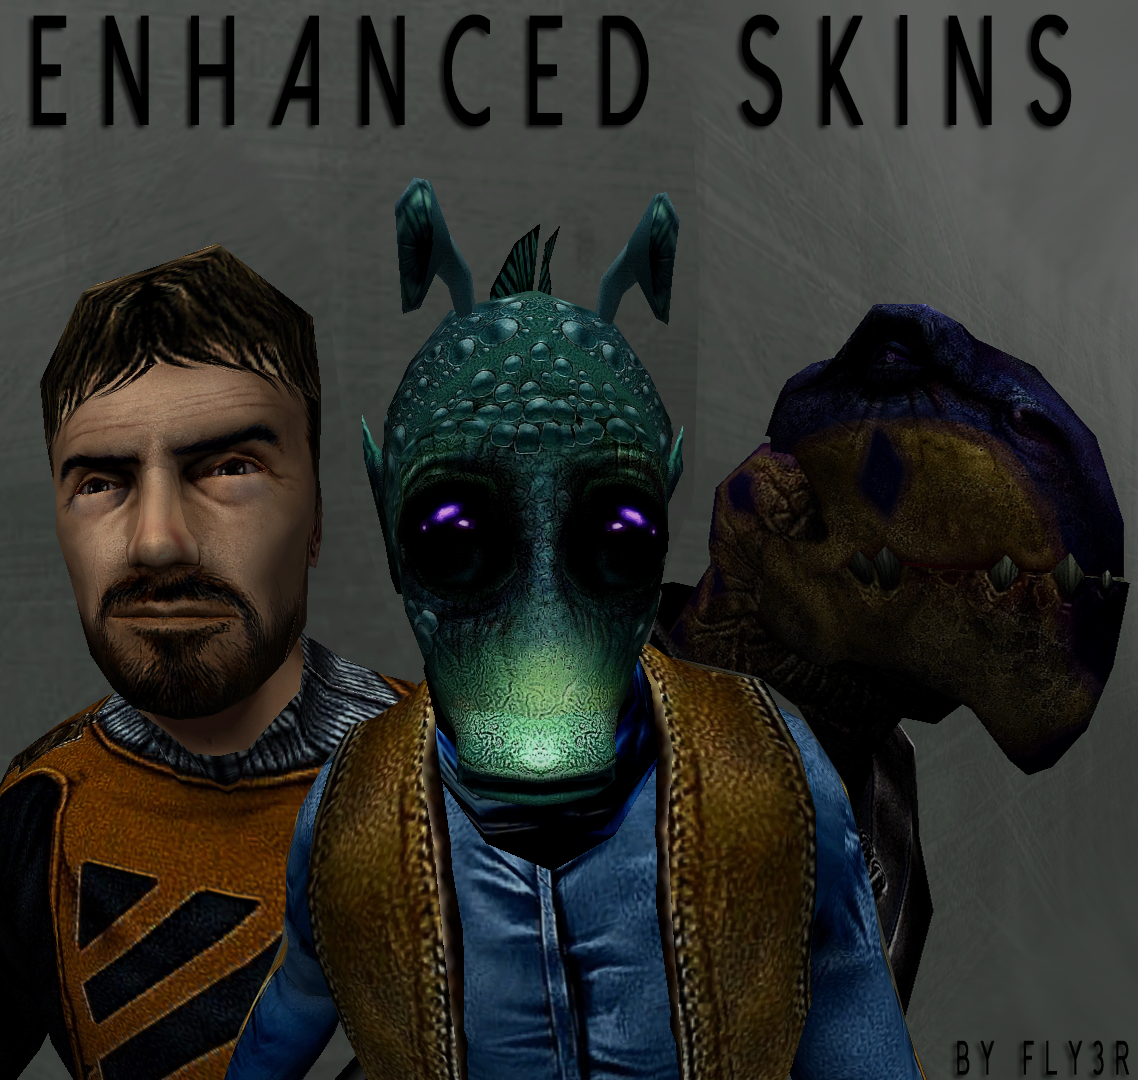 More information about "Enhanced_Skins"